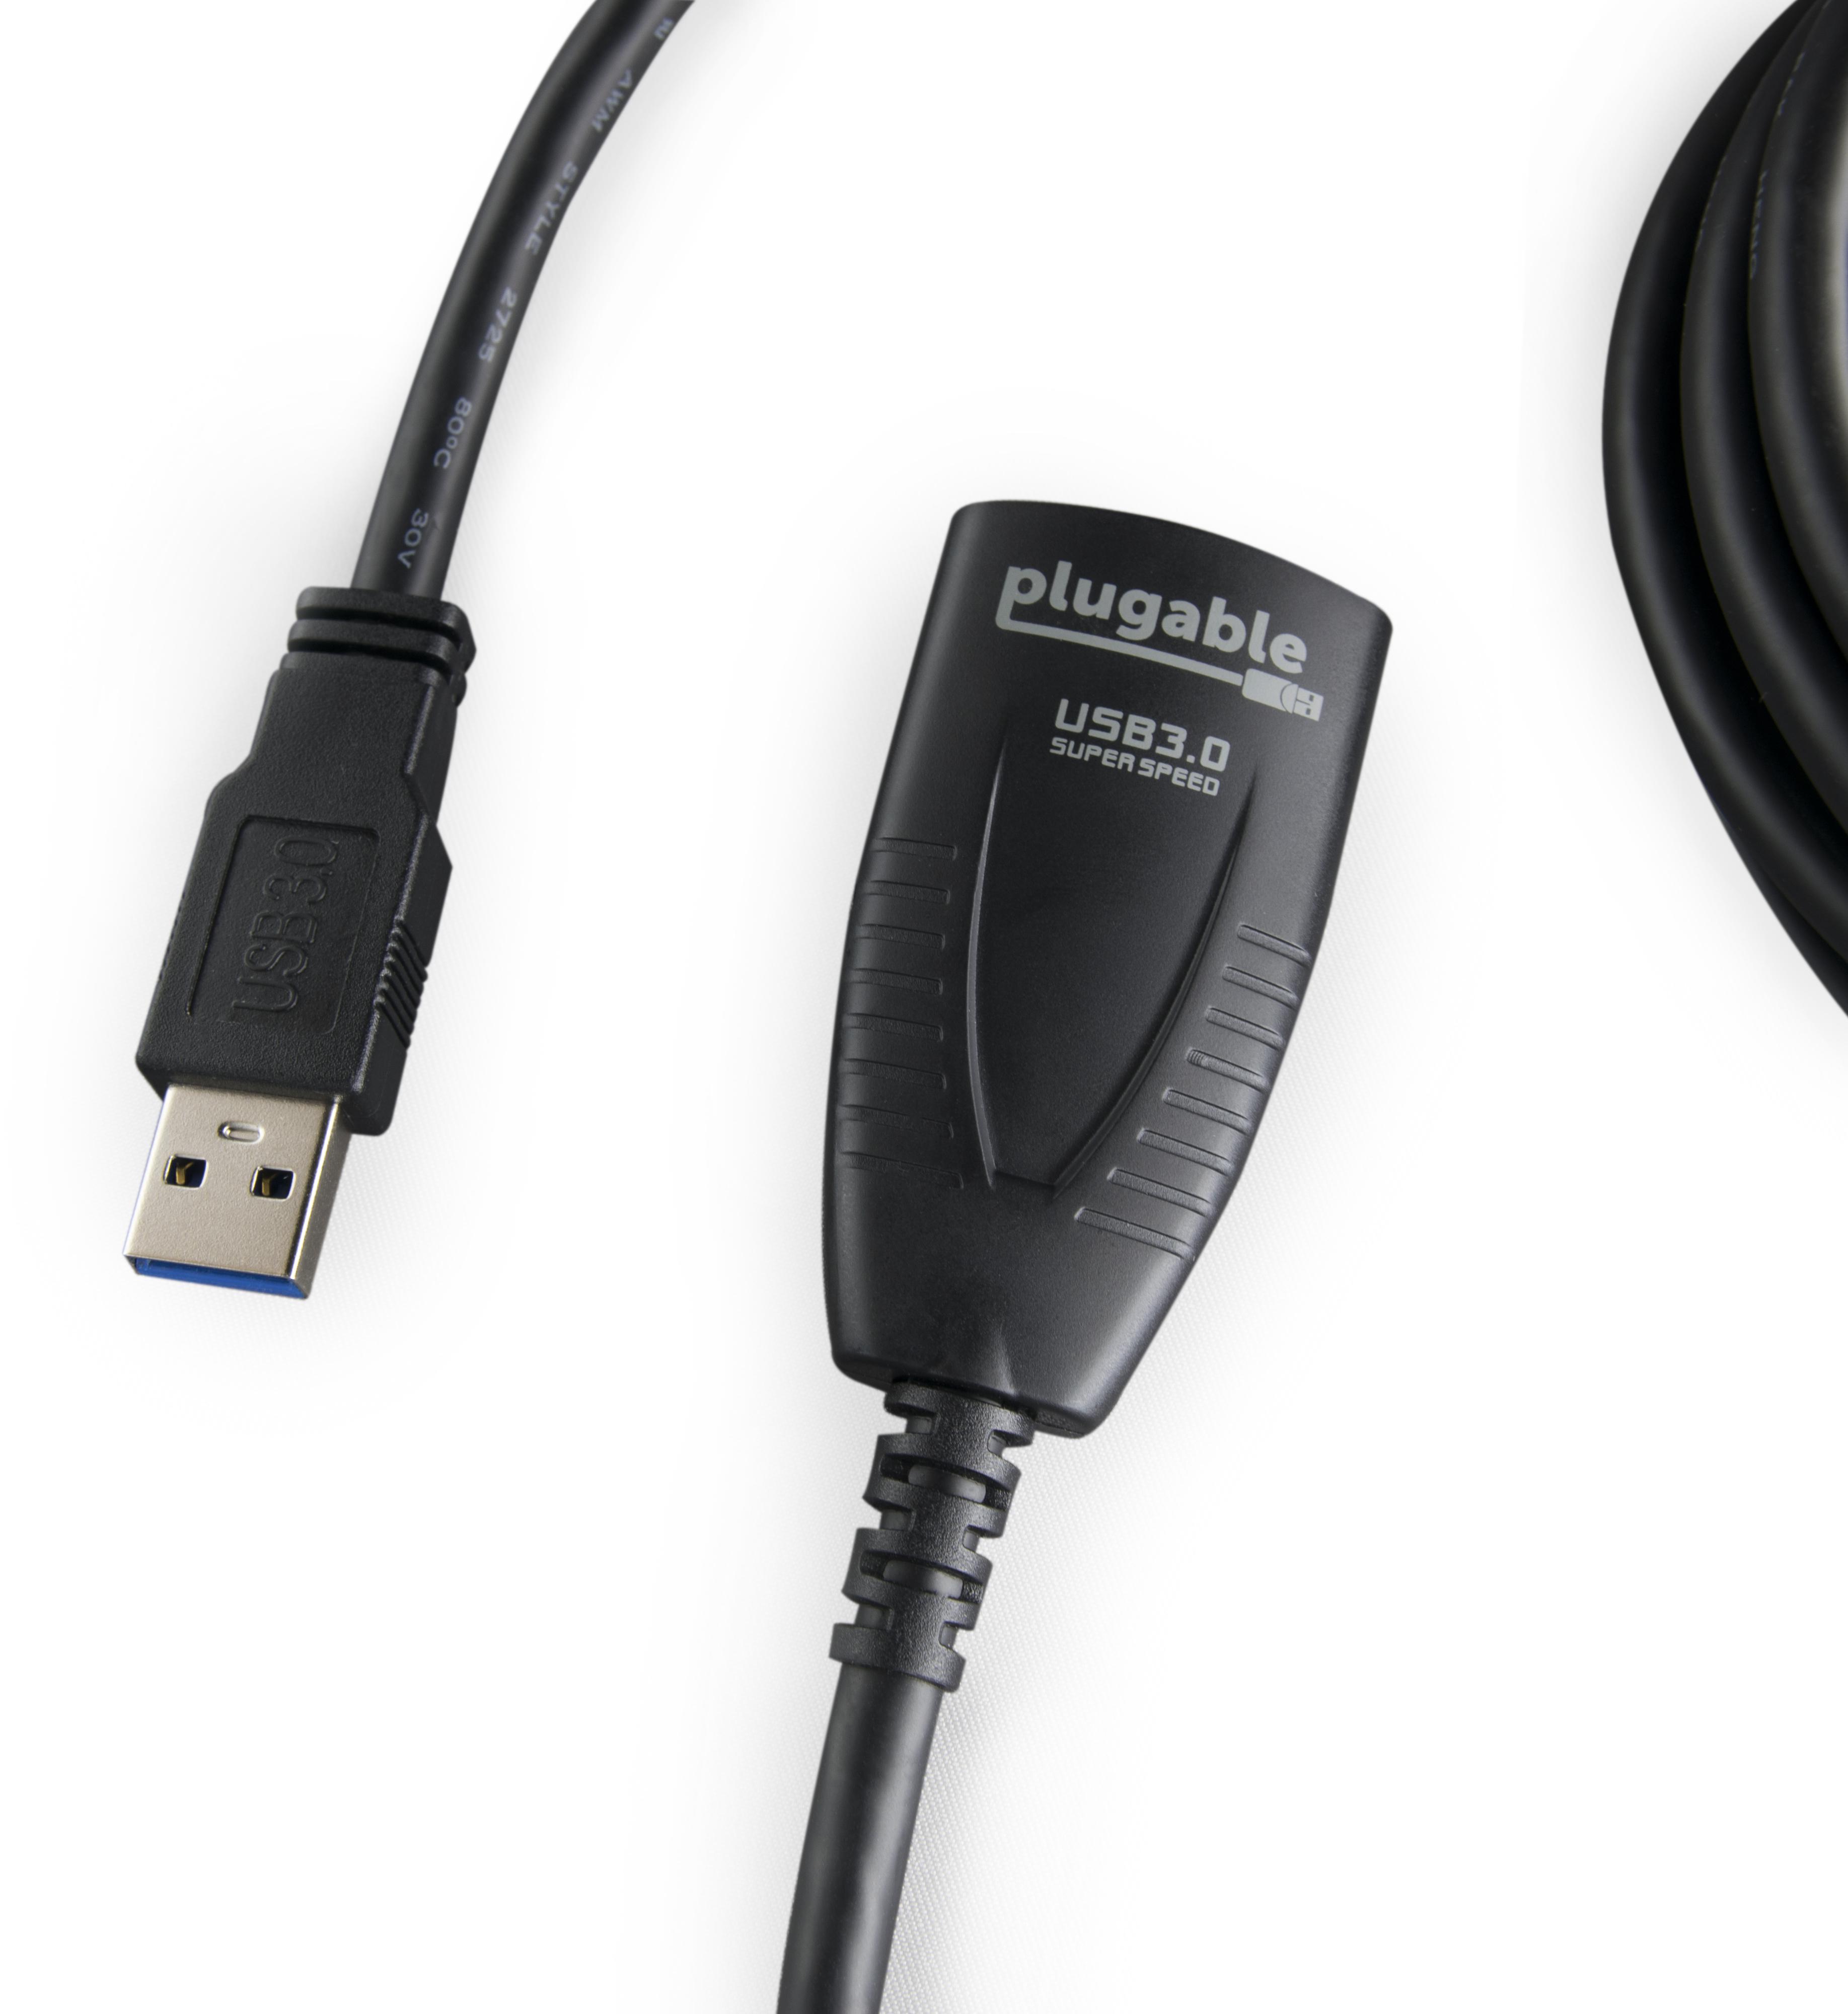 Plugable 5 Meter (16 Foot) USB 3.0 Active Extension Cable with AC Power Adapter and Back-Voltage Protection - image 3 of 6